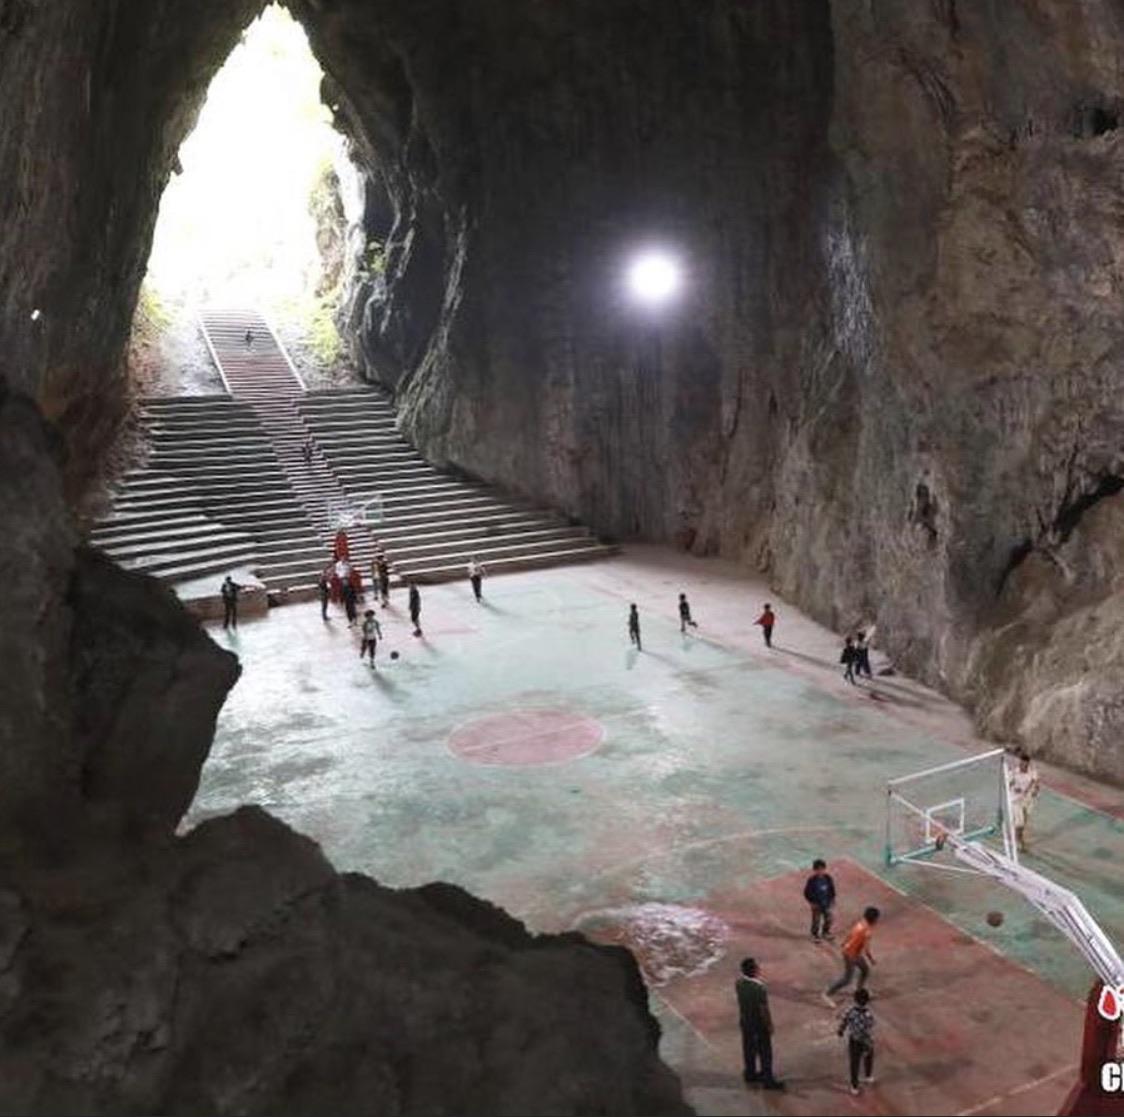 Just a basketball court in a cave.